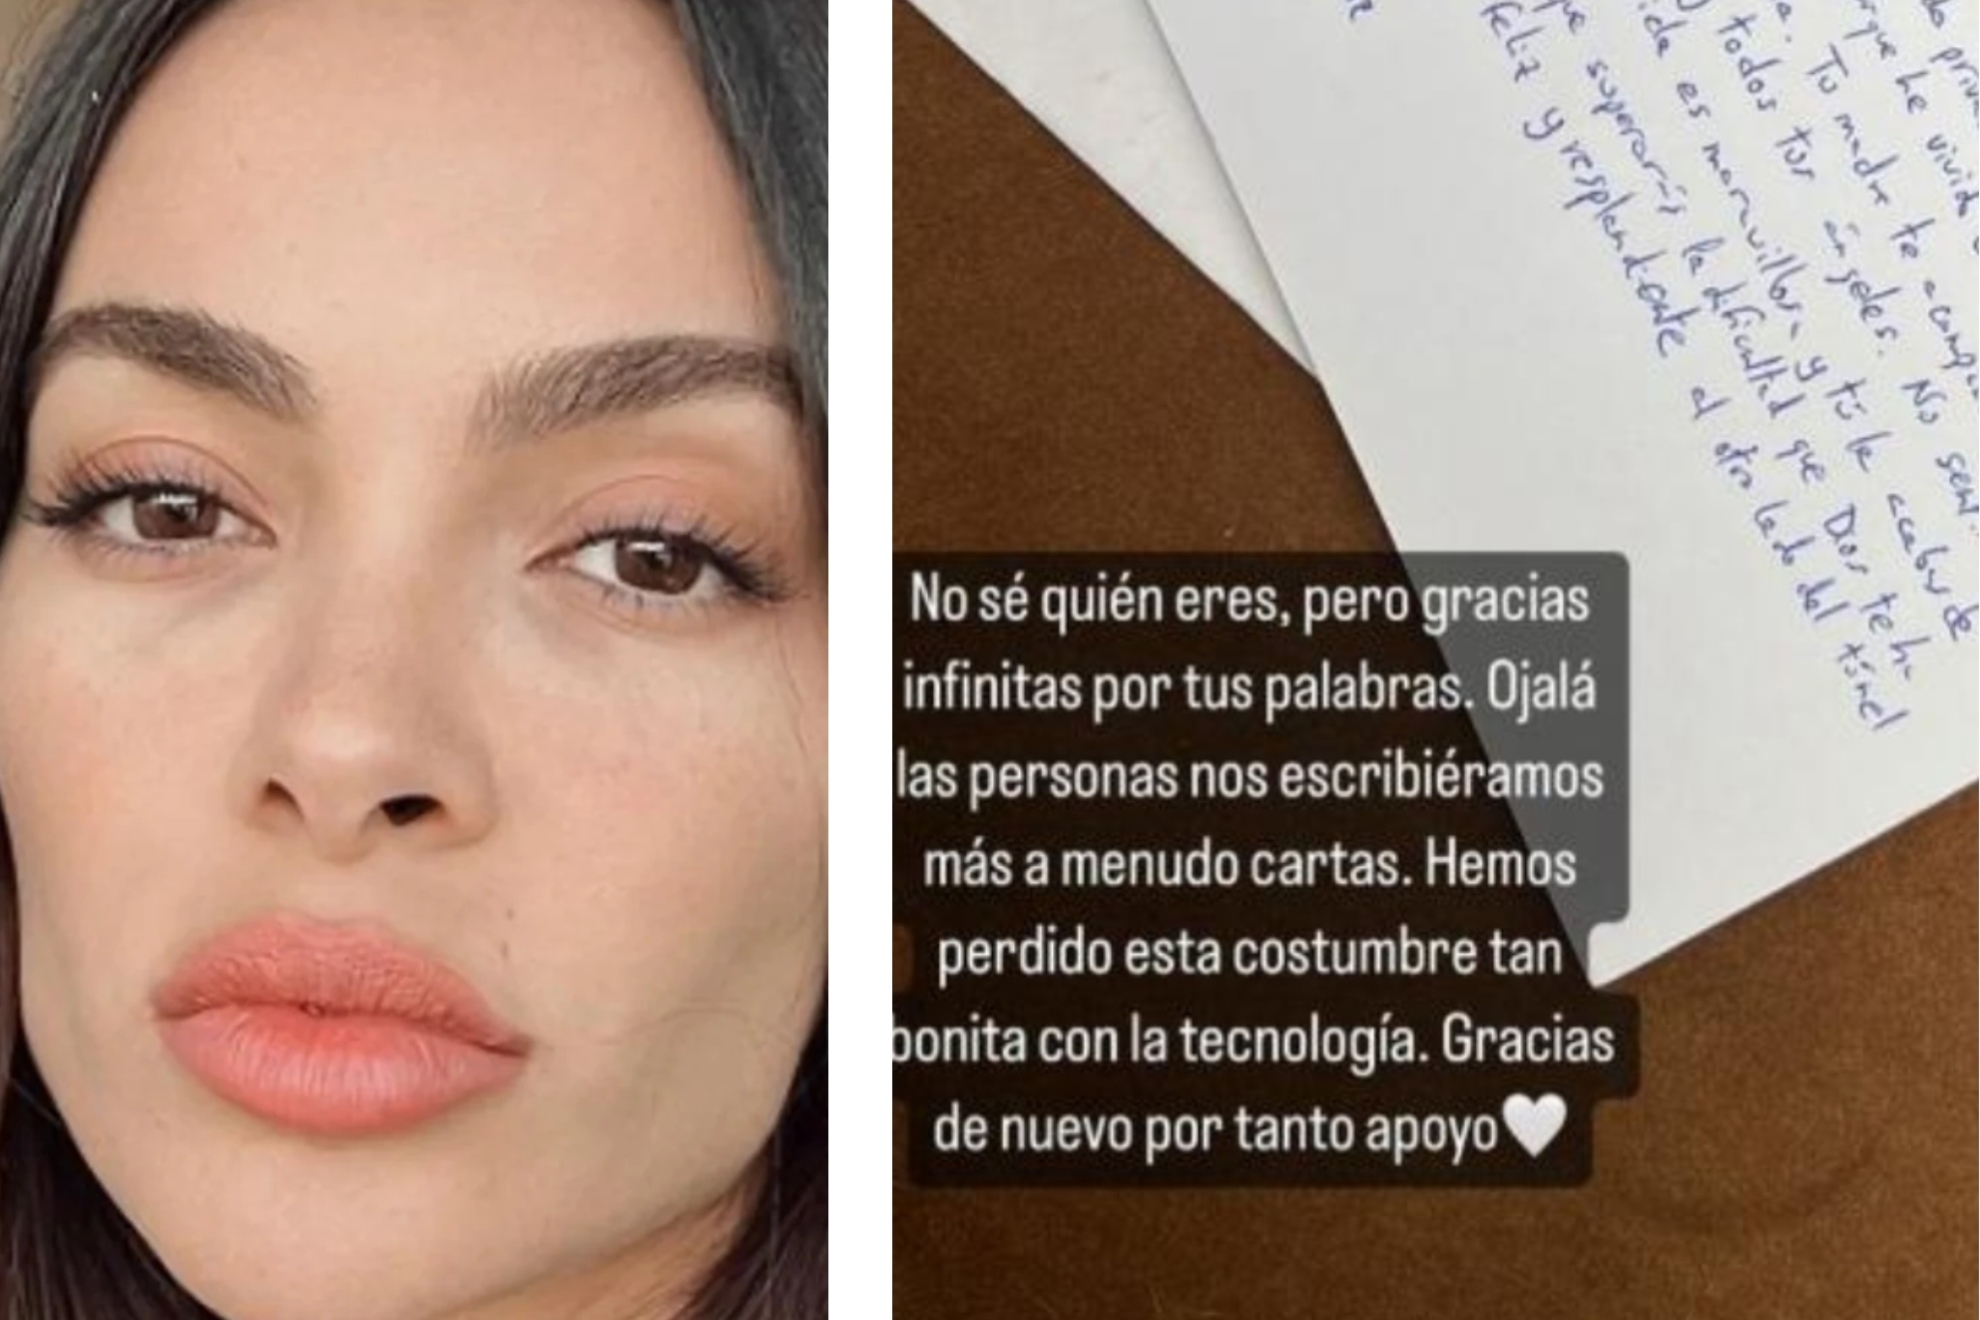 Joana Sanz, wife of Dani Alves, shares the handwritten letter she received: I don't know who you are, but thank you